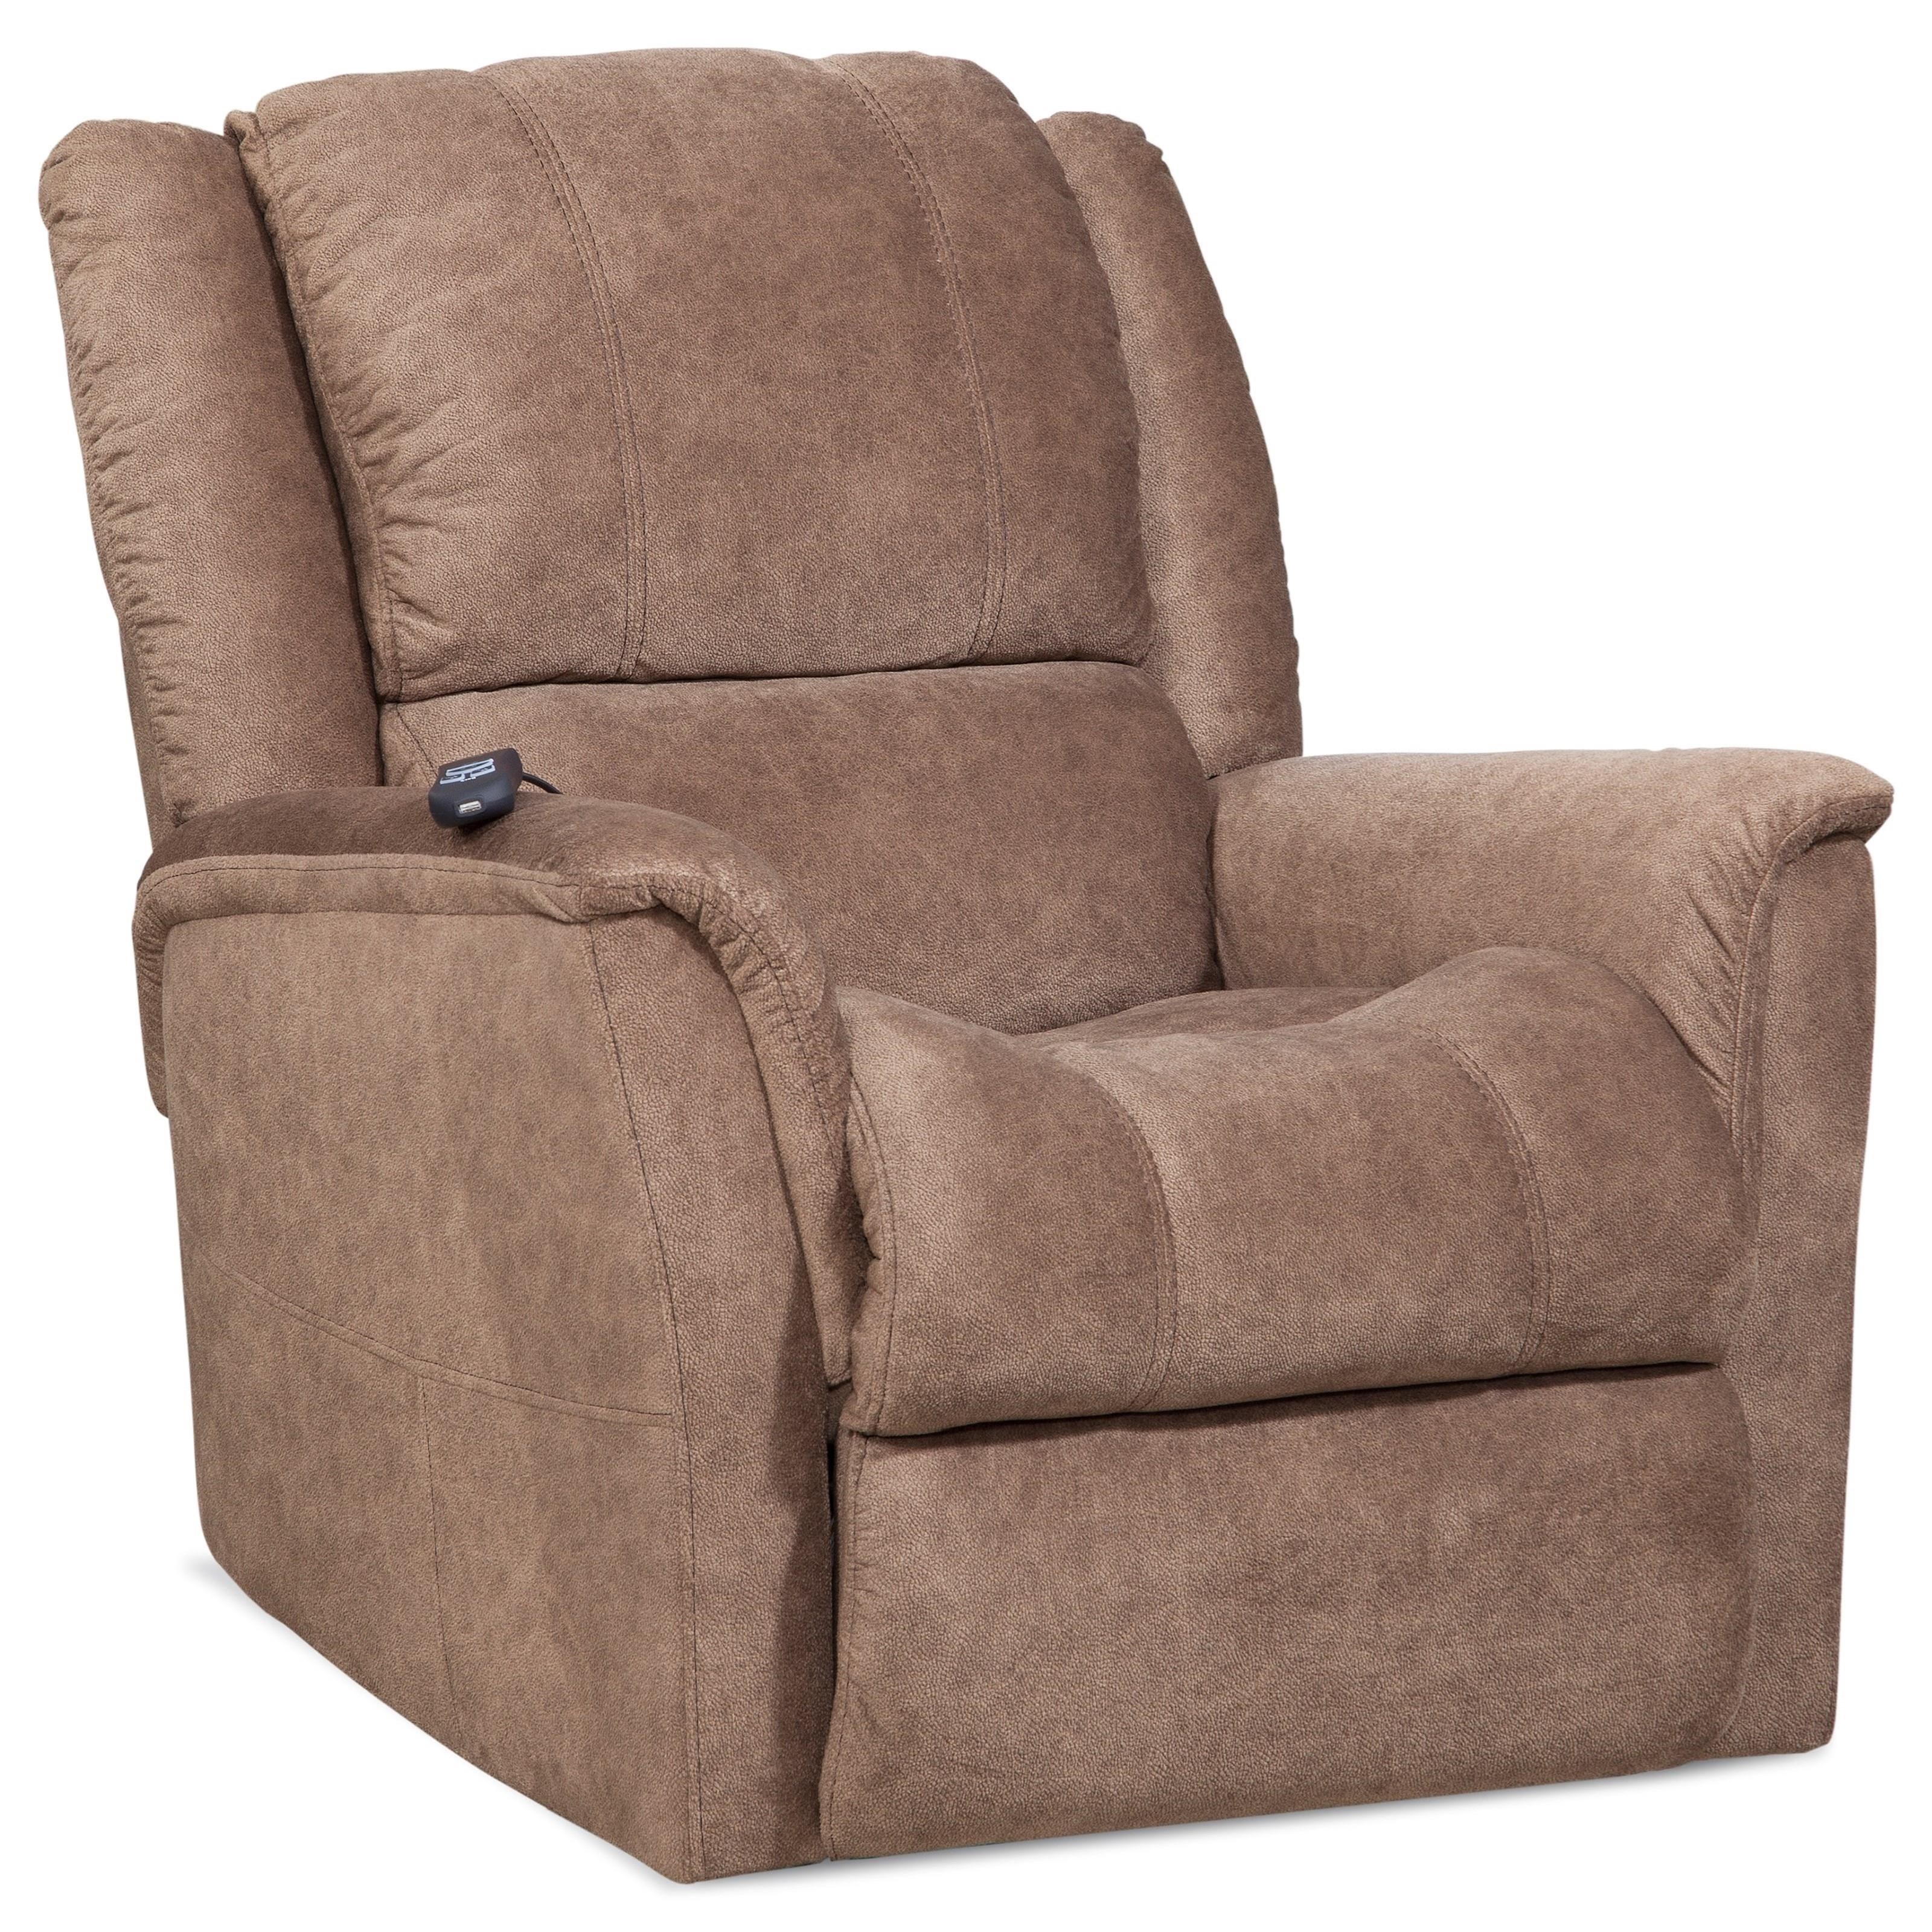 Power Reclining Lift Chair with Contrast Stitching